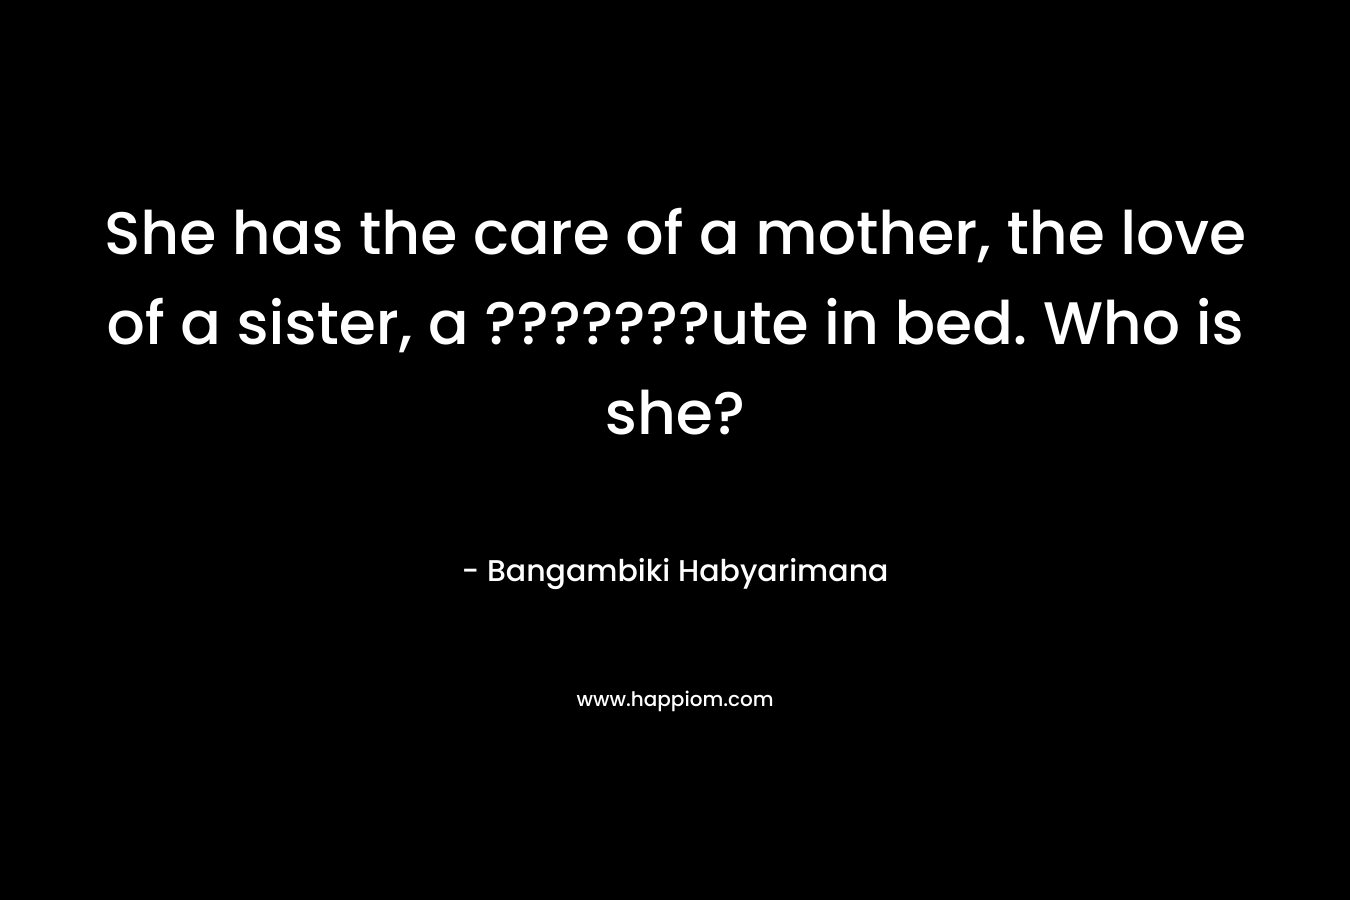 She has the care of a mother, the love of a sister, a ???????ute in bed. Who is she? – Bangambiki Habyarimana